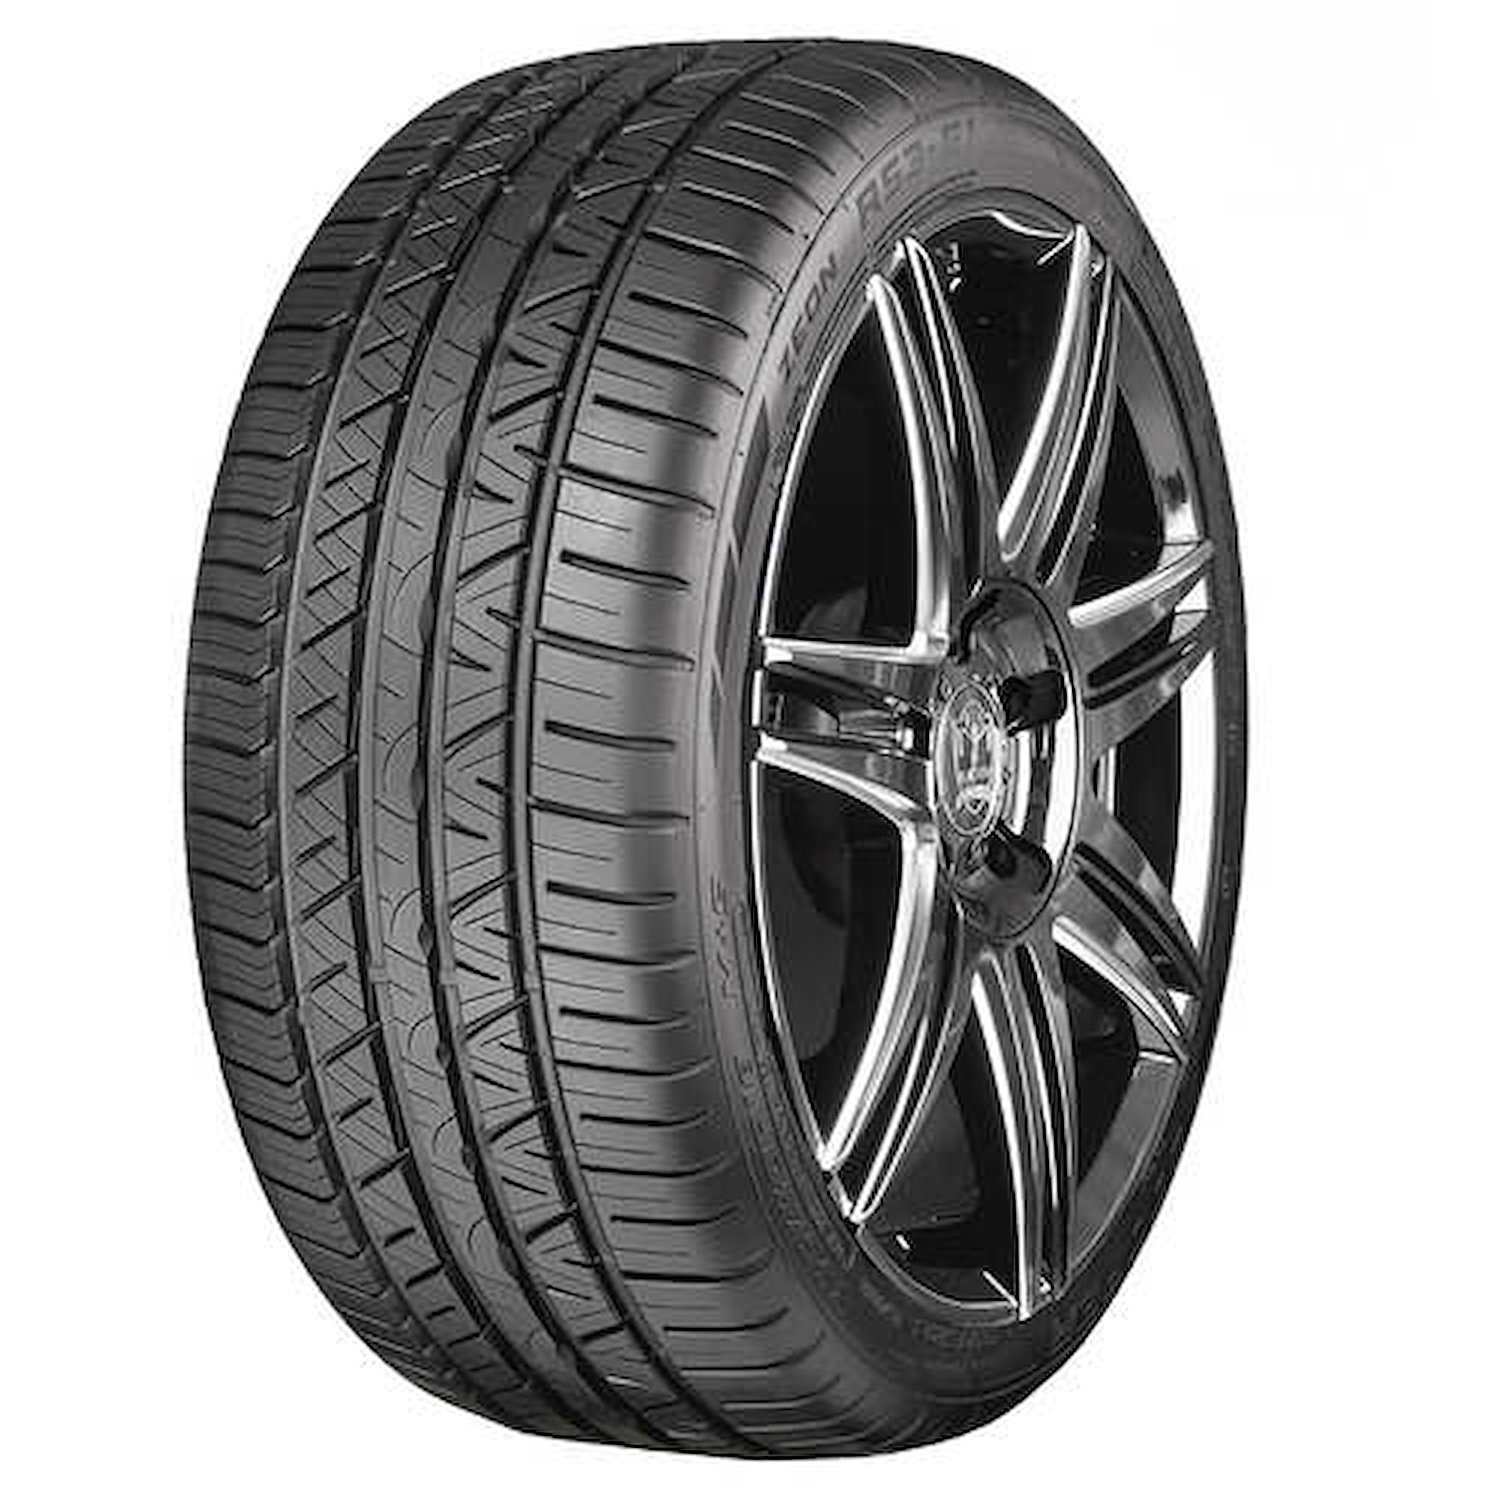 Zeon RS3-G1 High-Performance Tire, 215/45R18